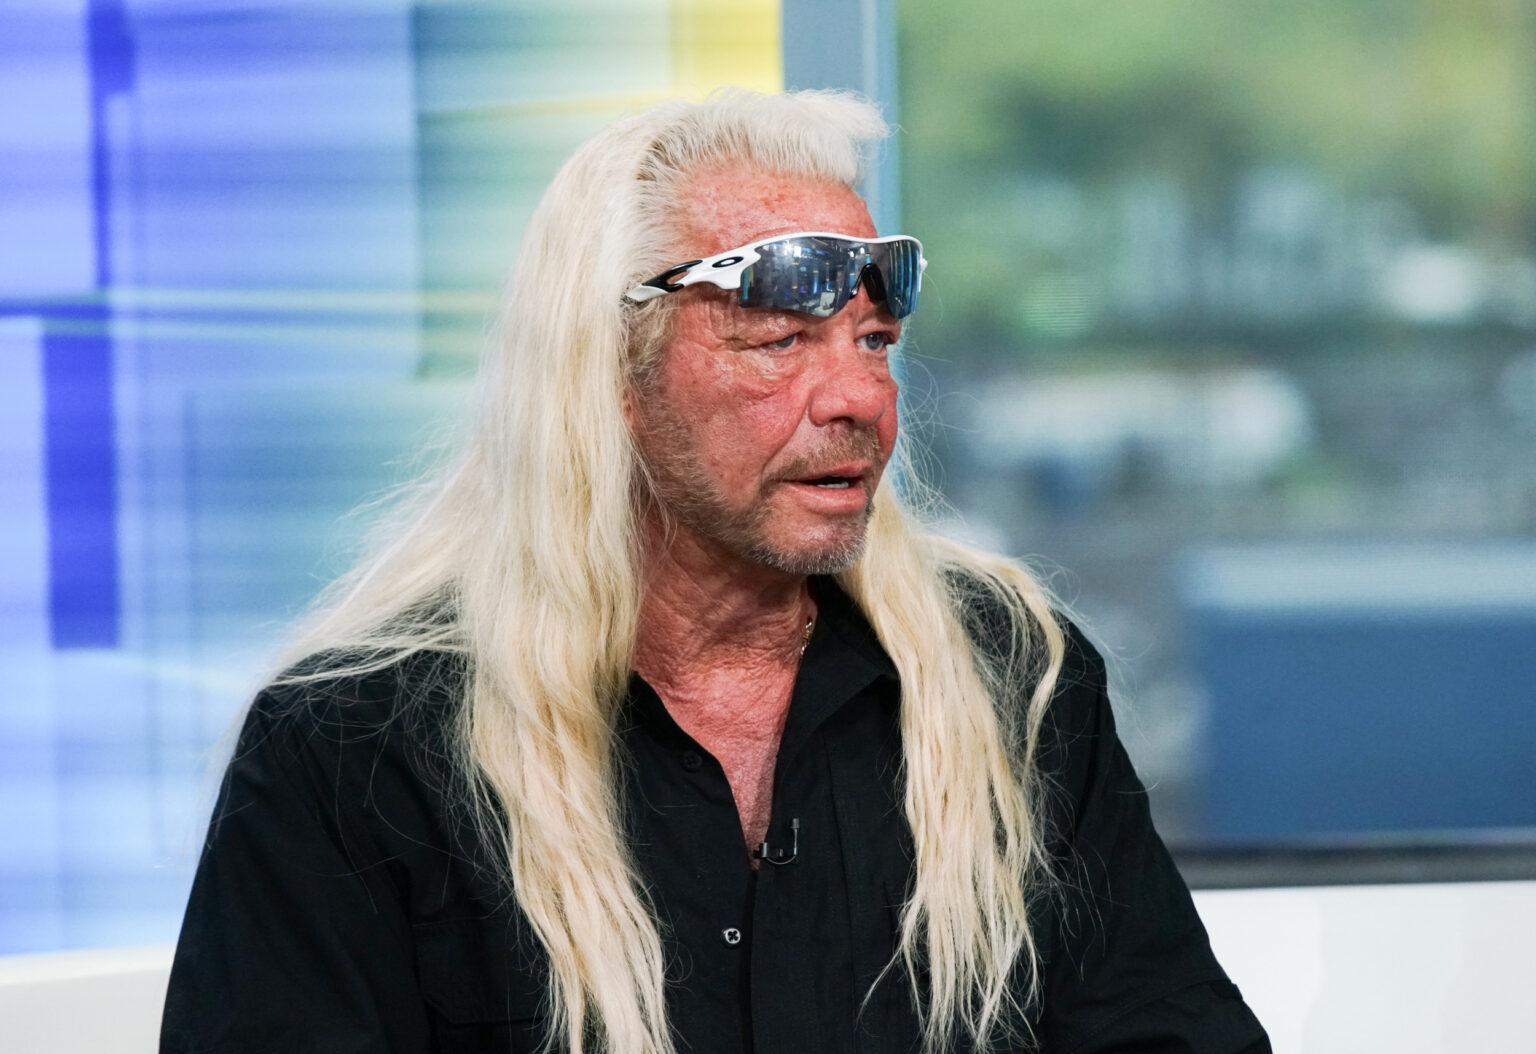 Has Dog the Bounty Hunter clued in on new evidence in the search for Brian Laundrie? Hopefully for justice and Gabby Petito's memory he has.